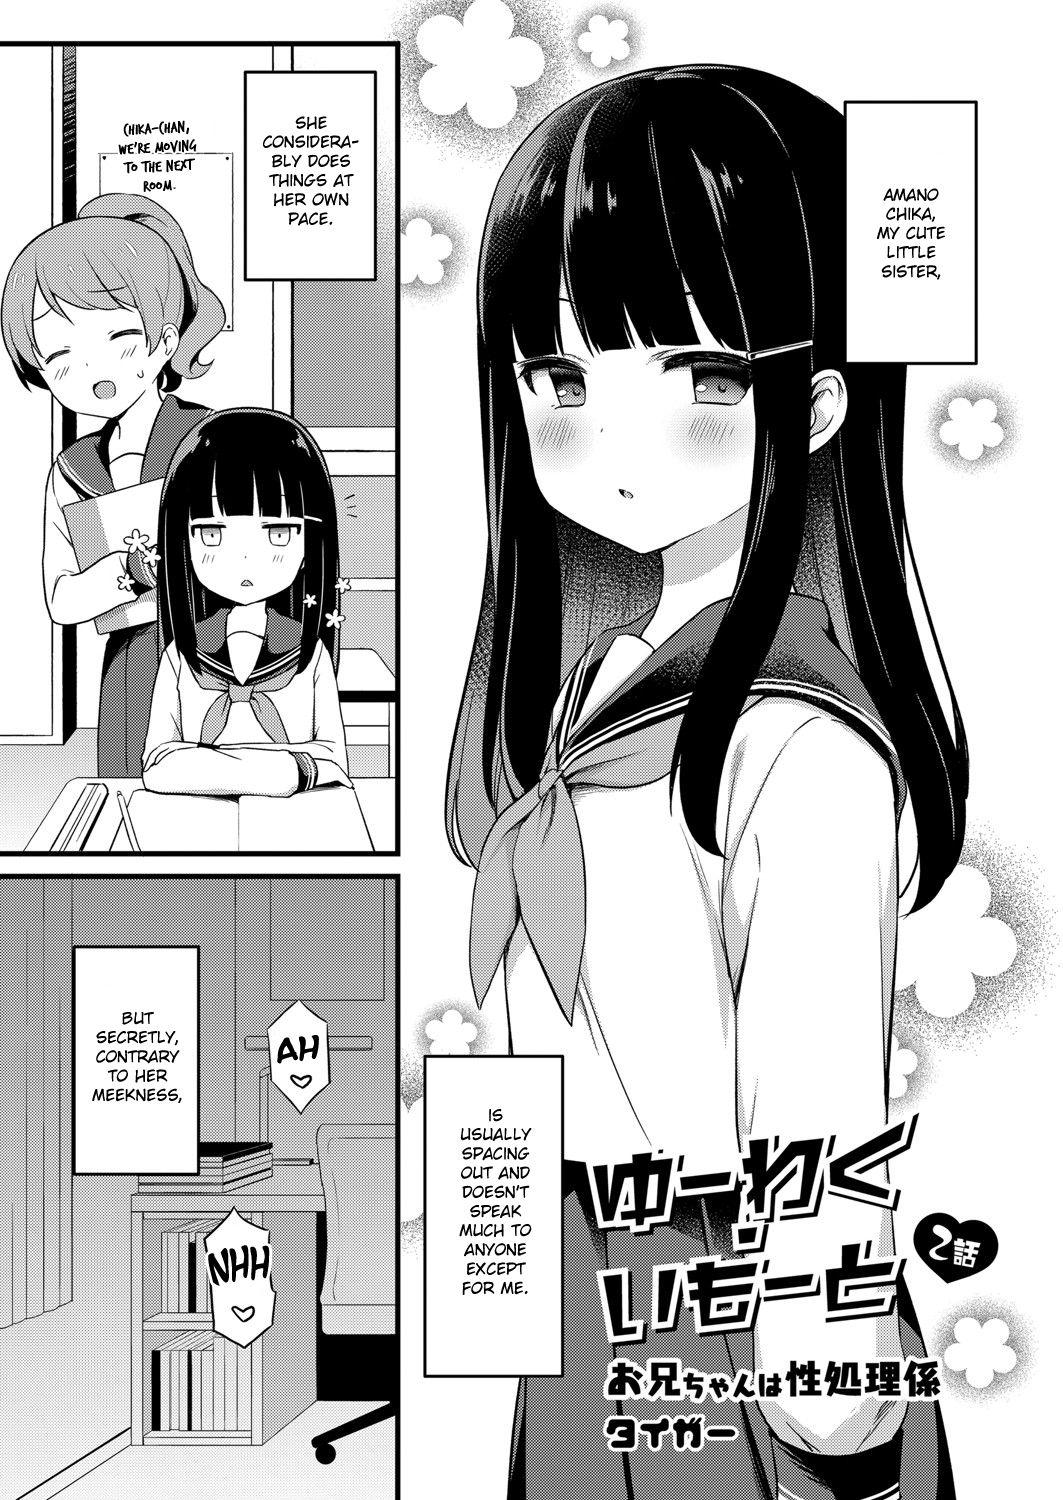 Face [Tiger] Yuuwaku・Imouto #2 Onii-chan wa seishori gakari | Little Sister Temptation #2 Onii-chan is in Charge of My Libido Management (COMIC Reboot Vol. 07) [English] [Digital] Cream Pie - Page 1